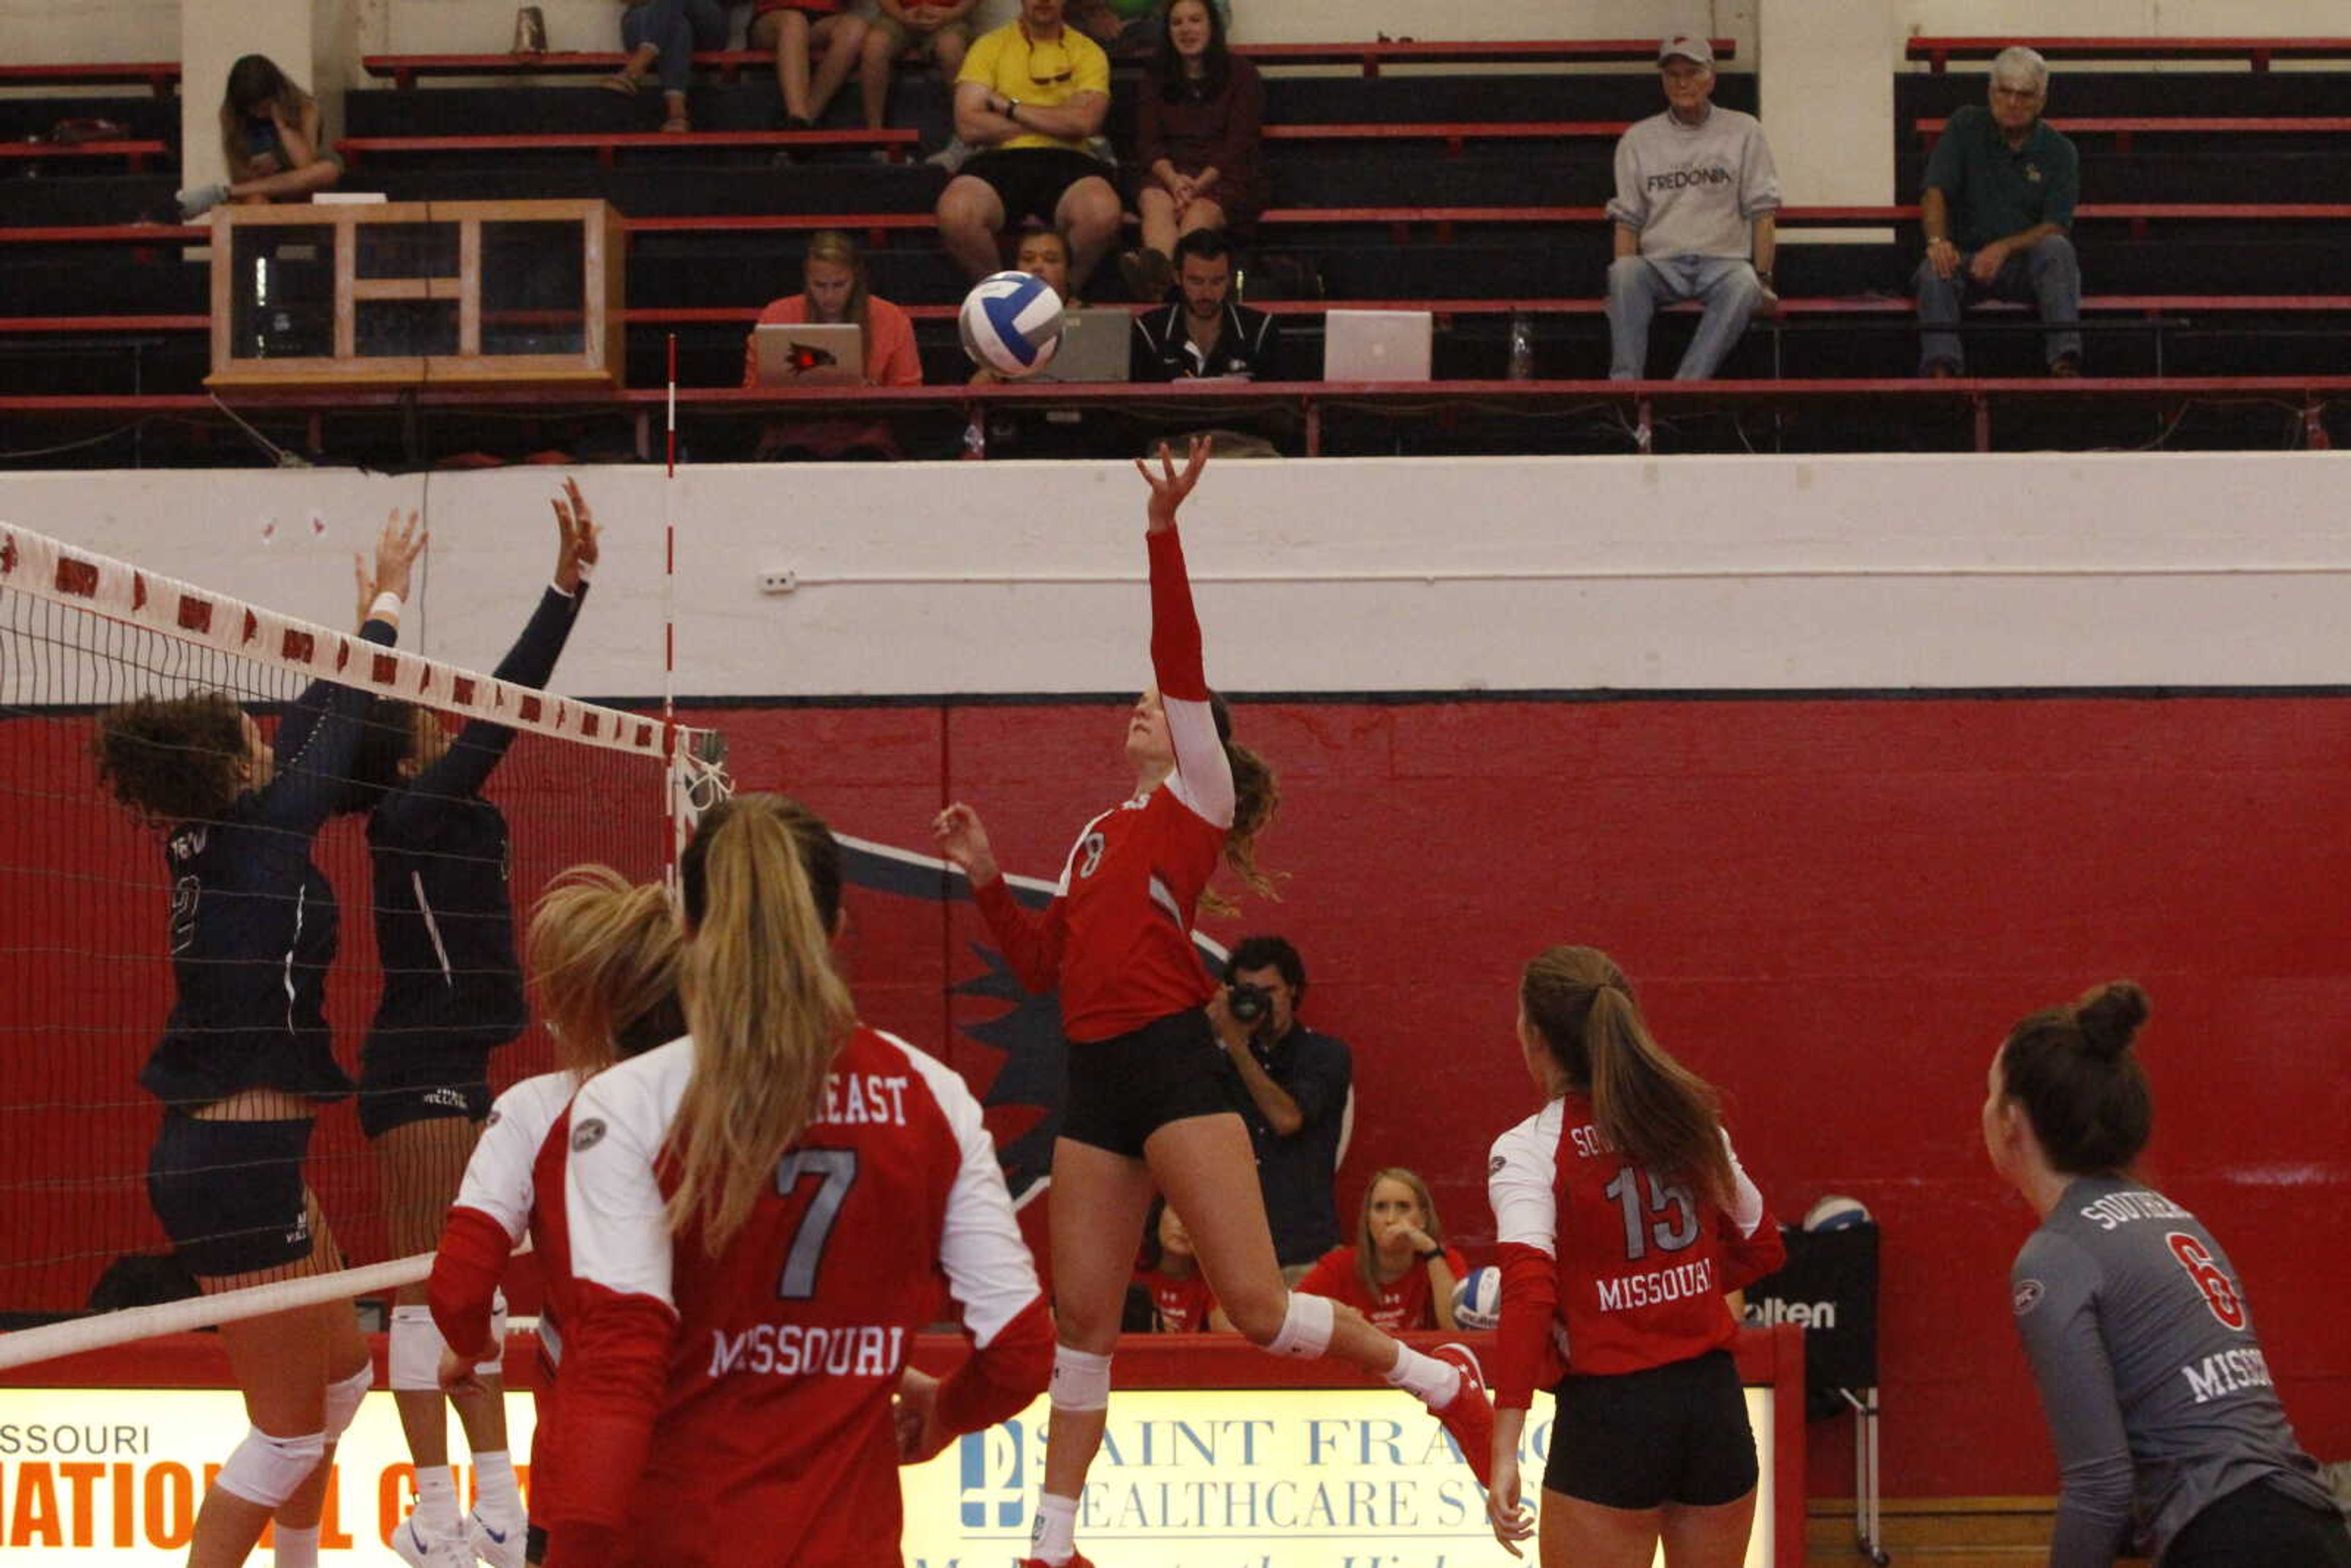 Senior Haley Bilbruck rises to tip a ball over defenders in a victory over Missouri Baptist University on Aug. 13.